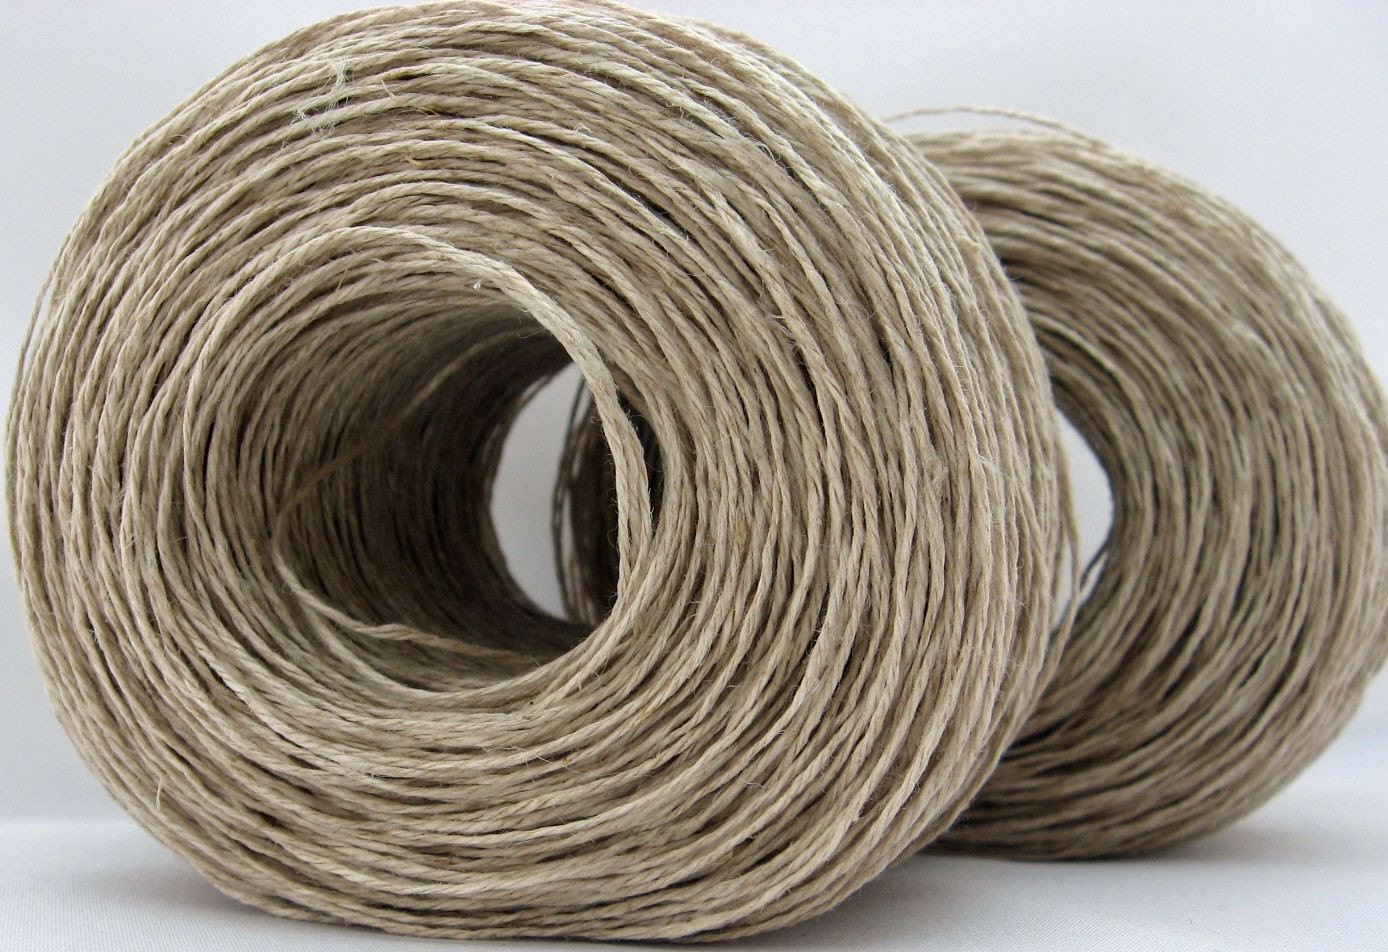 2 Skeins Hemp Yarn Organically Grown Heather Fingering Eco Friendly - Complimentary US Shipping